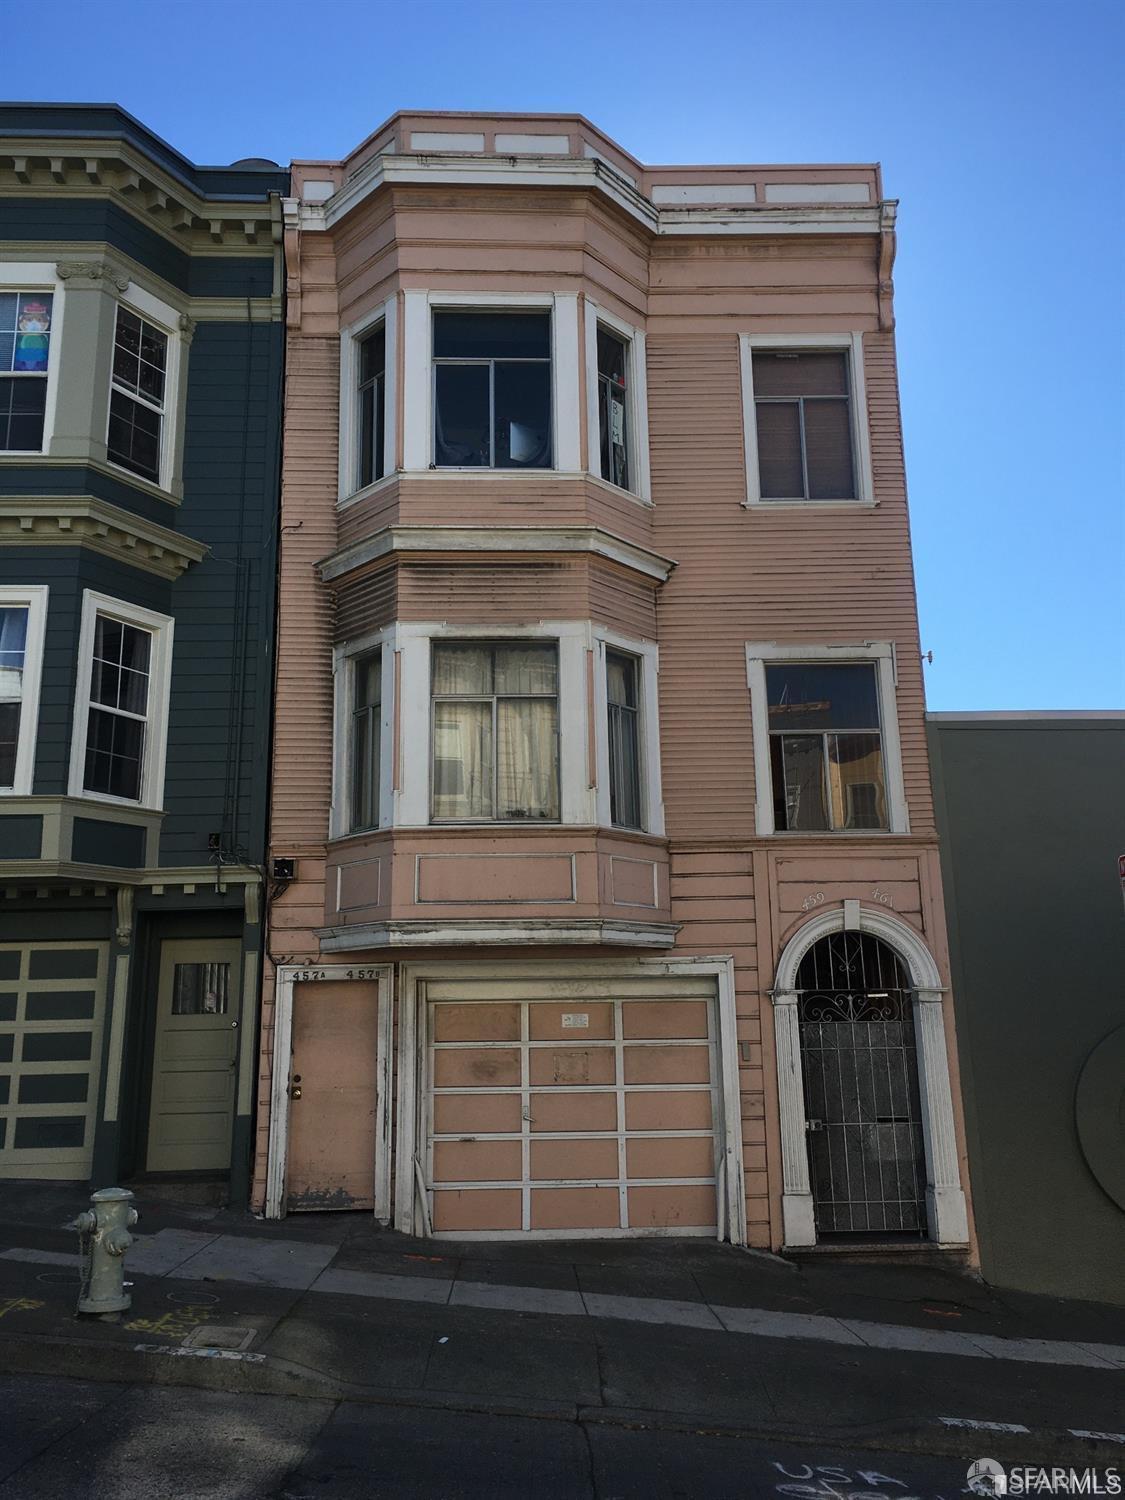 Amazing North Beach location!  This 4-units needs TLC.  A bonus room and a full bath(not warranted)in the garage.  Great potential and upside on rent.  Close to Chinatown, shops, restaurants,Financial District and public transportation.  Inspection report and termite report on file.